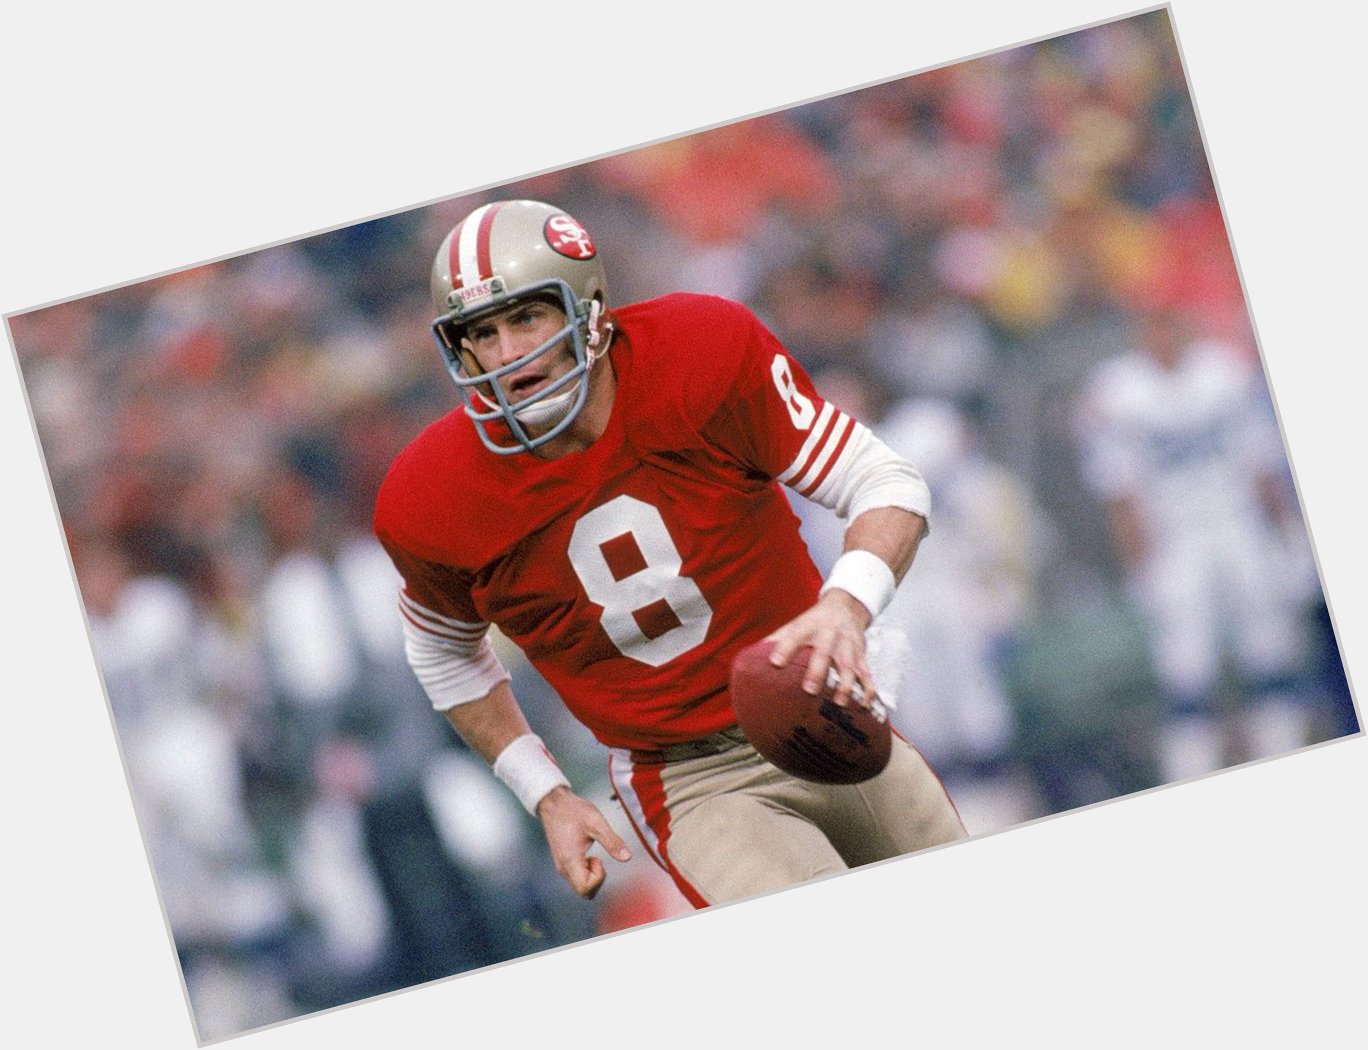 Happy birthday to the legend, Steve Young    